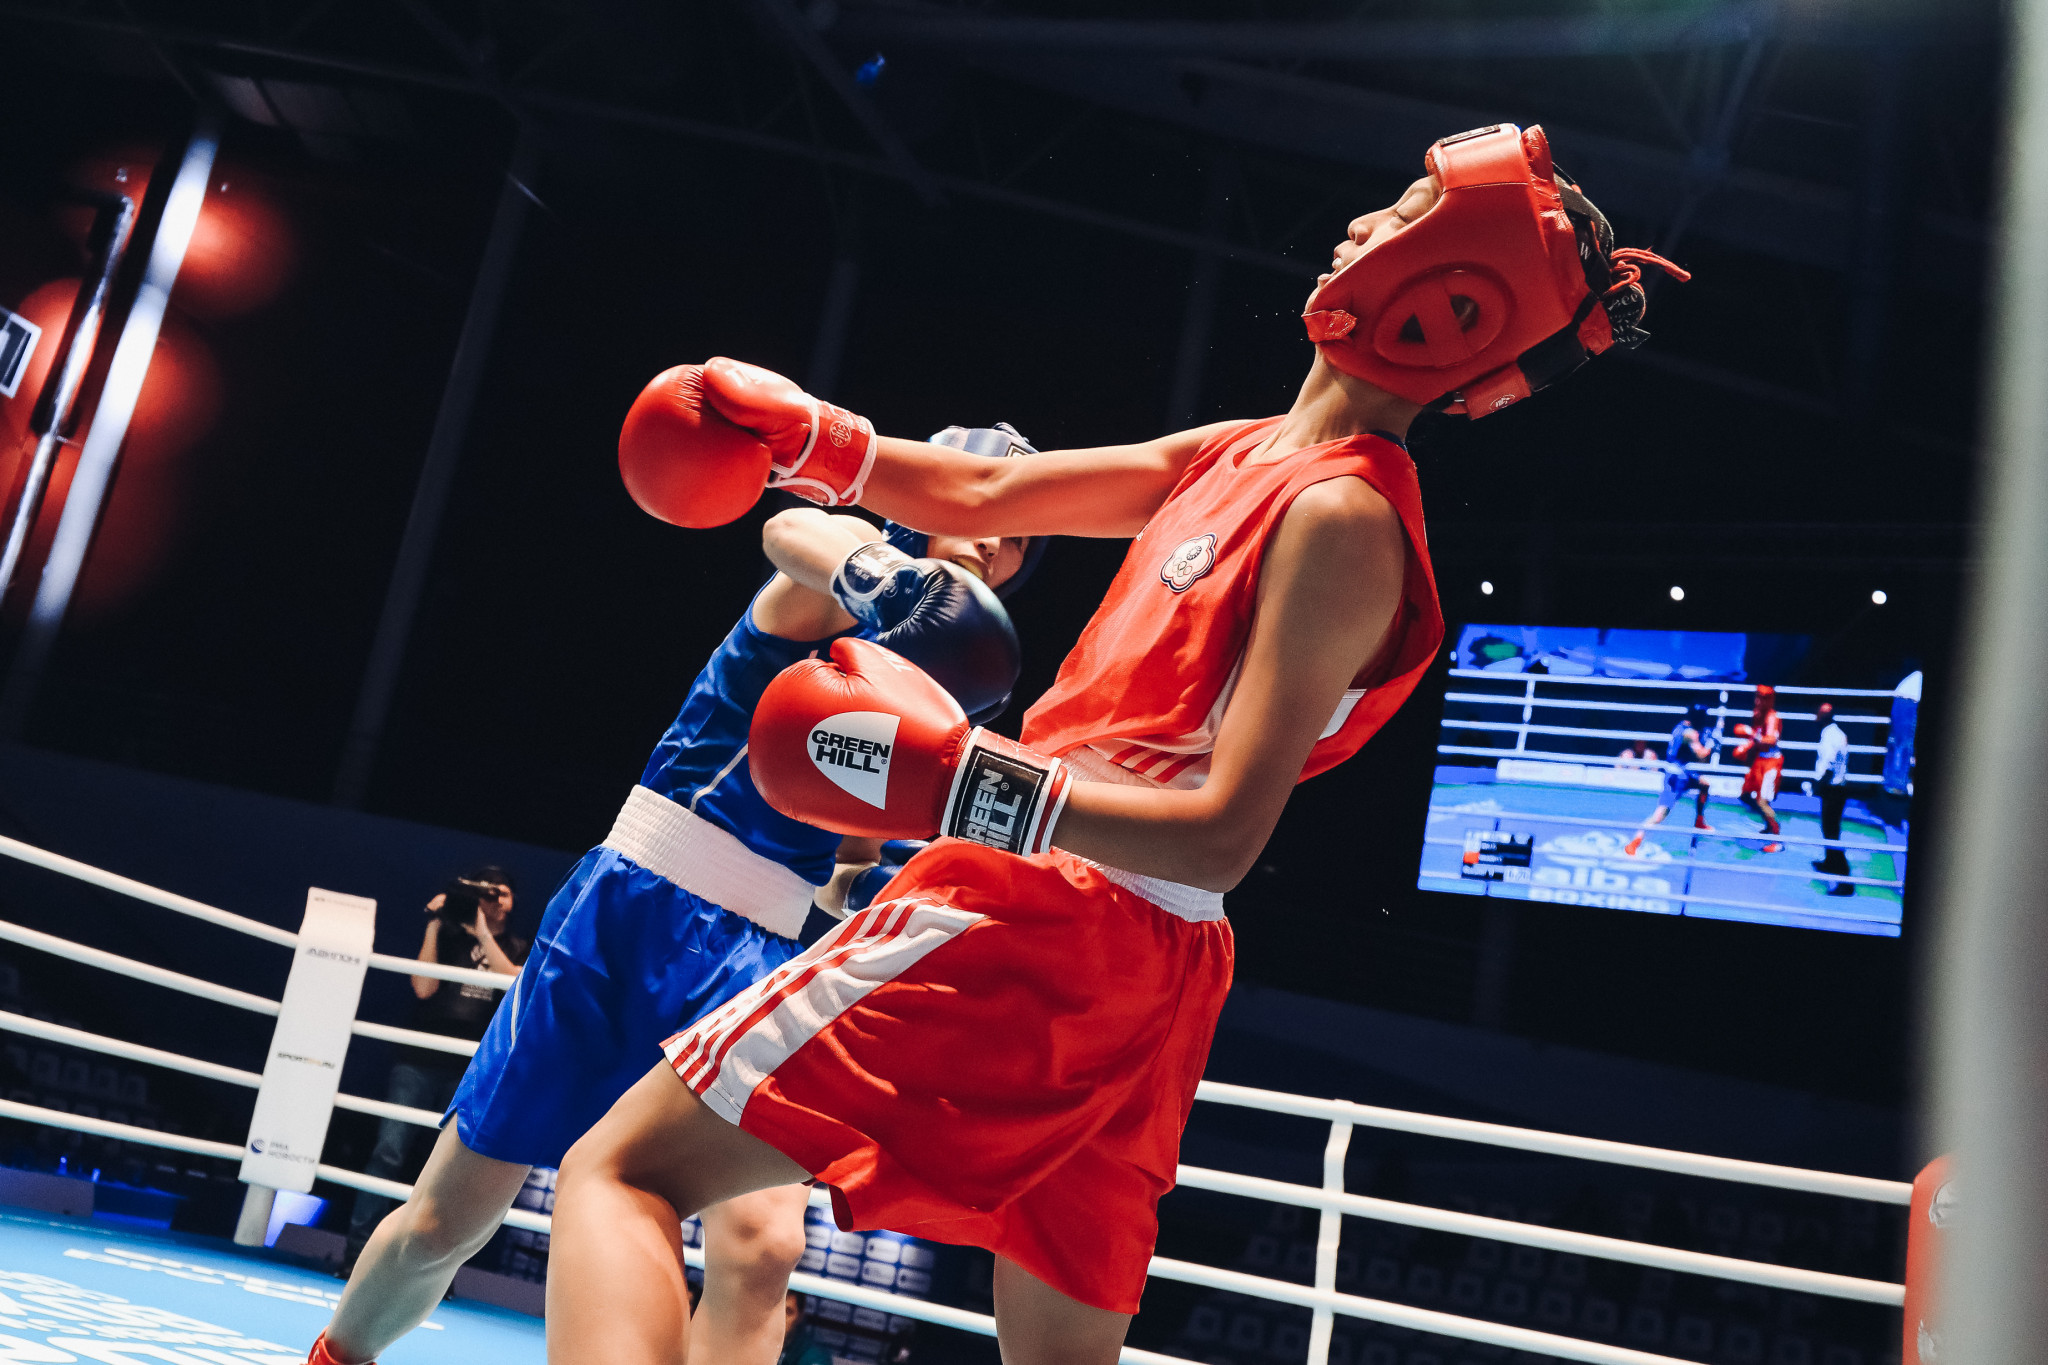 Team mate Wu Shih-Yi did not fare as well in the lightweight division ©AIBA